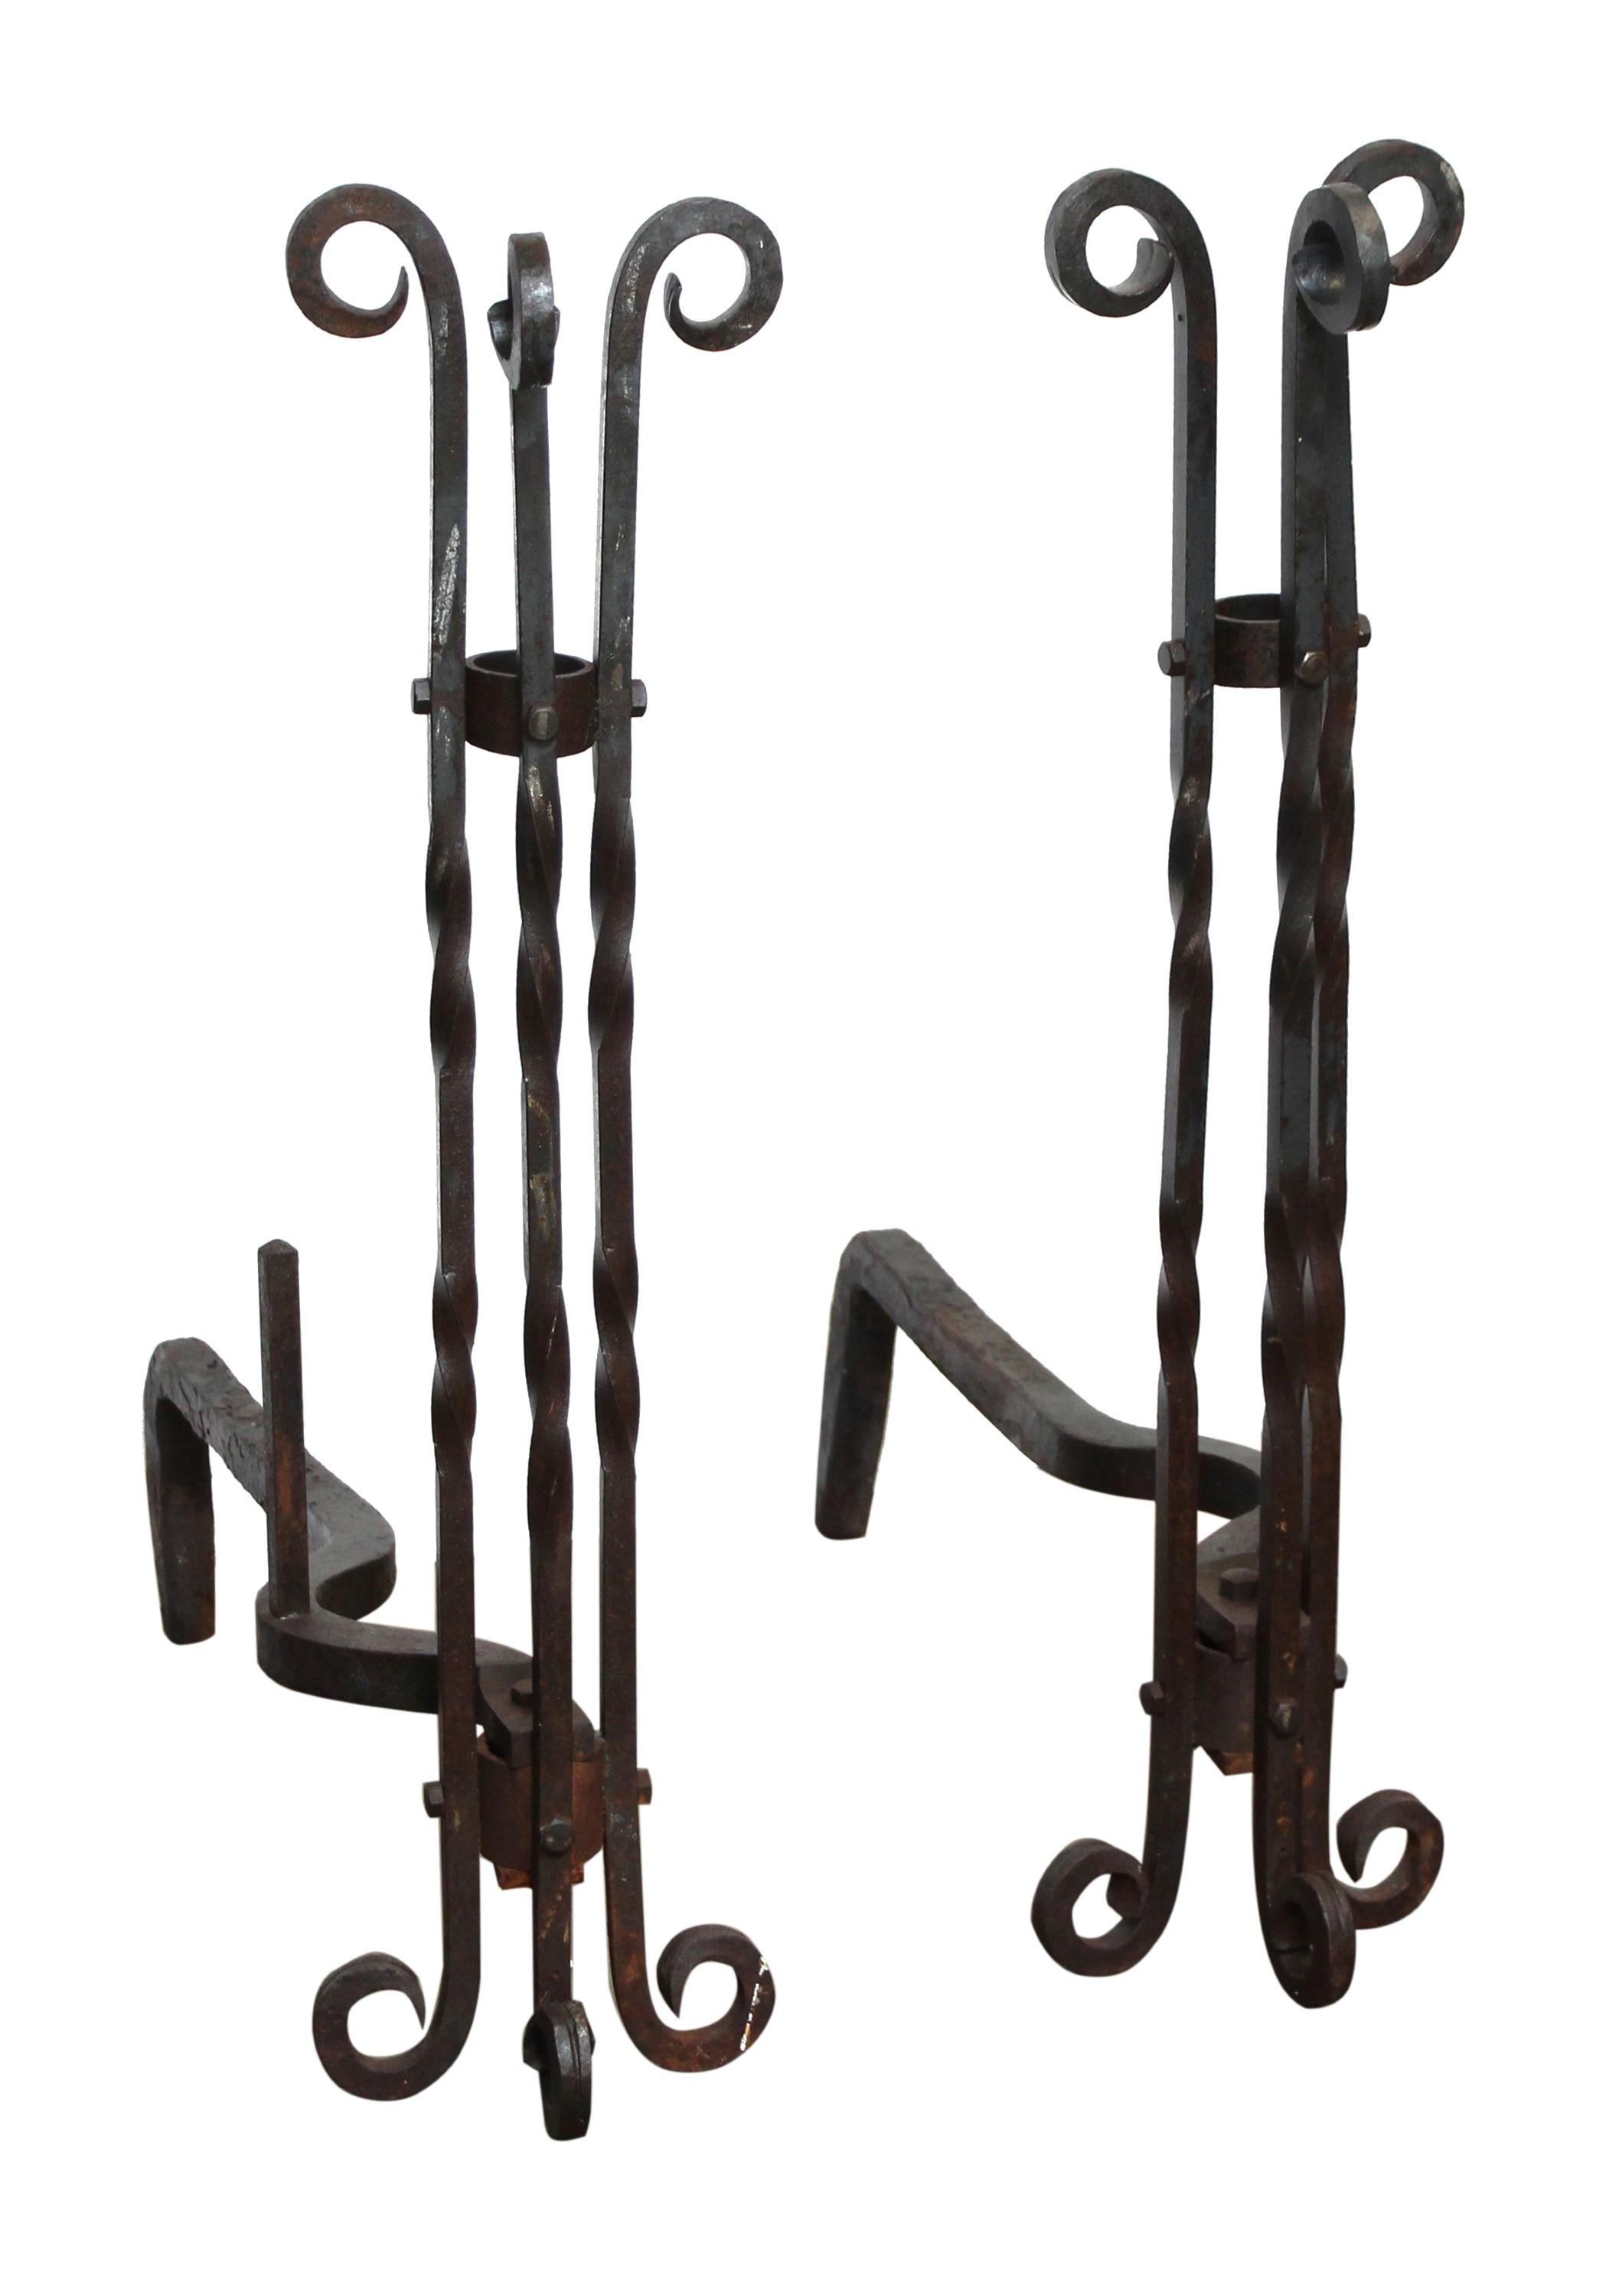 Pair of tall wrought iron andirons with twisted design and curled top and legs. These andirons have an unusual, elegant design and are tall and narrow. Priced as a pair. Measure - 28.5 in.